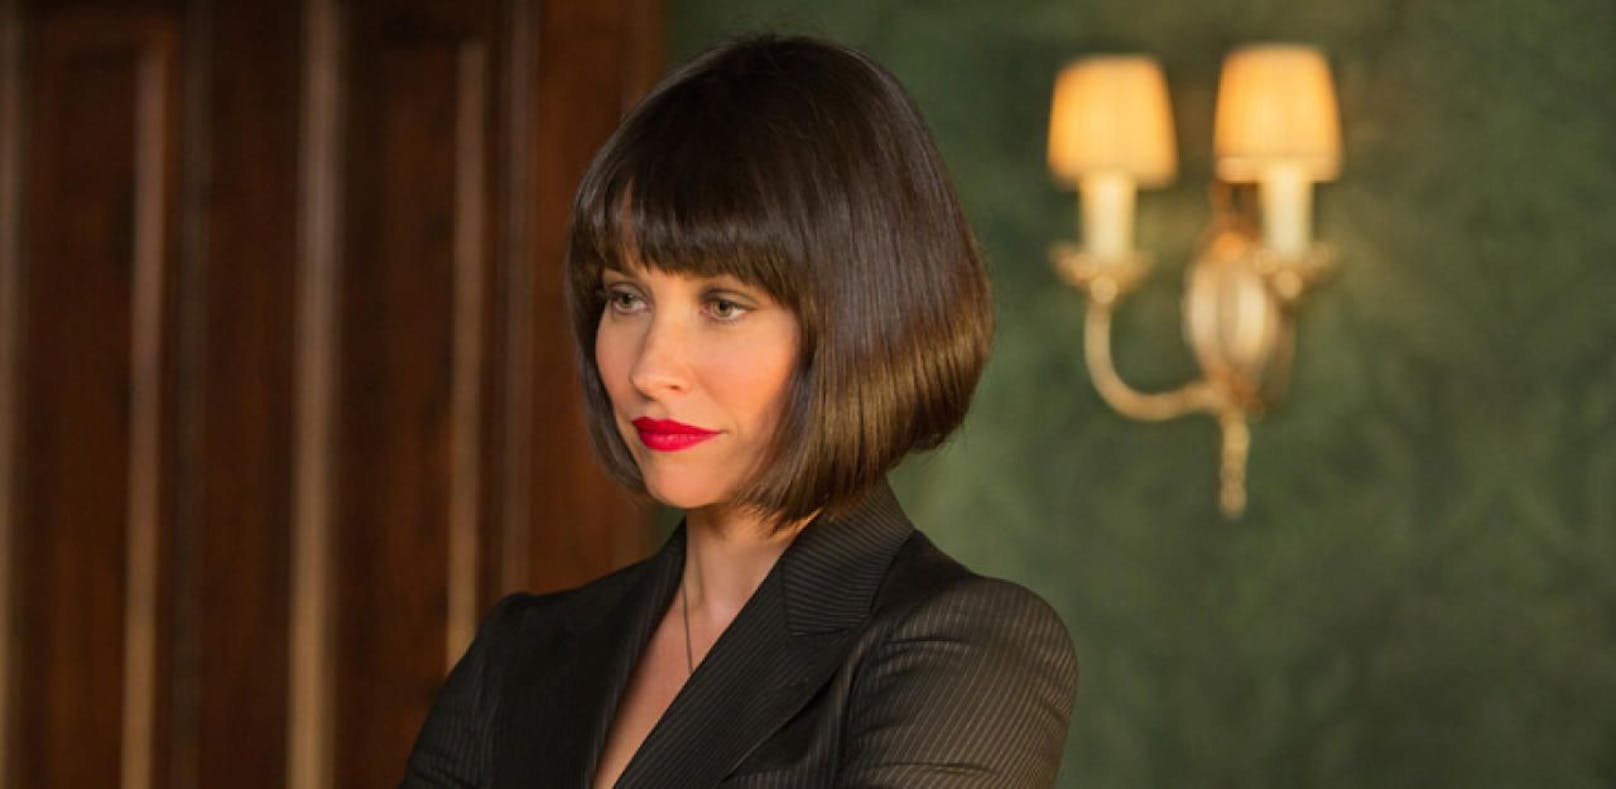 Lilly offenbart Plot von "Ant-Man and the Wasp"